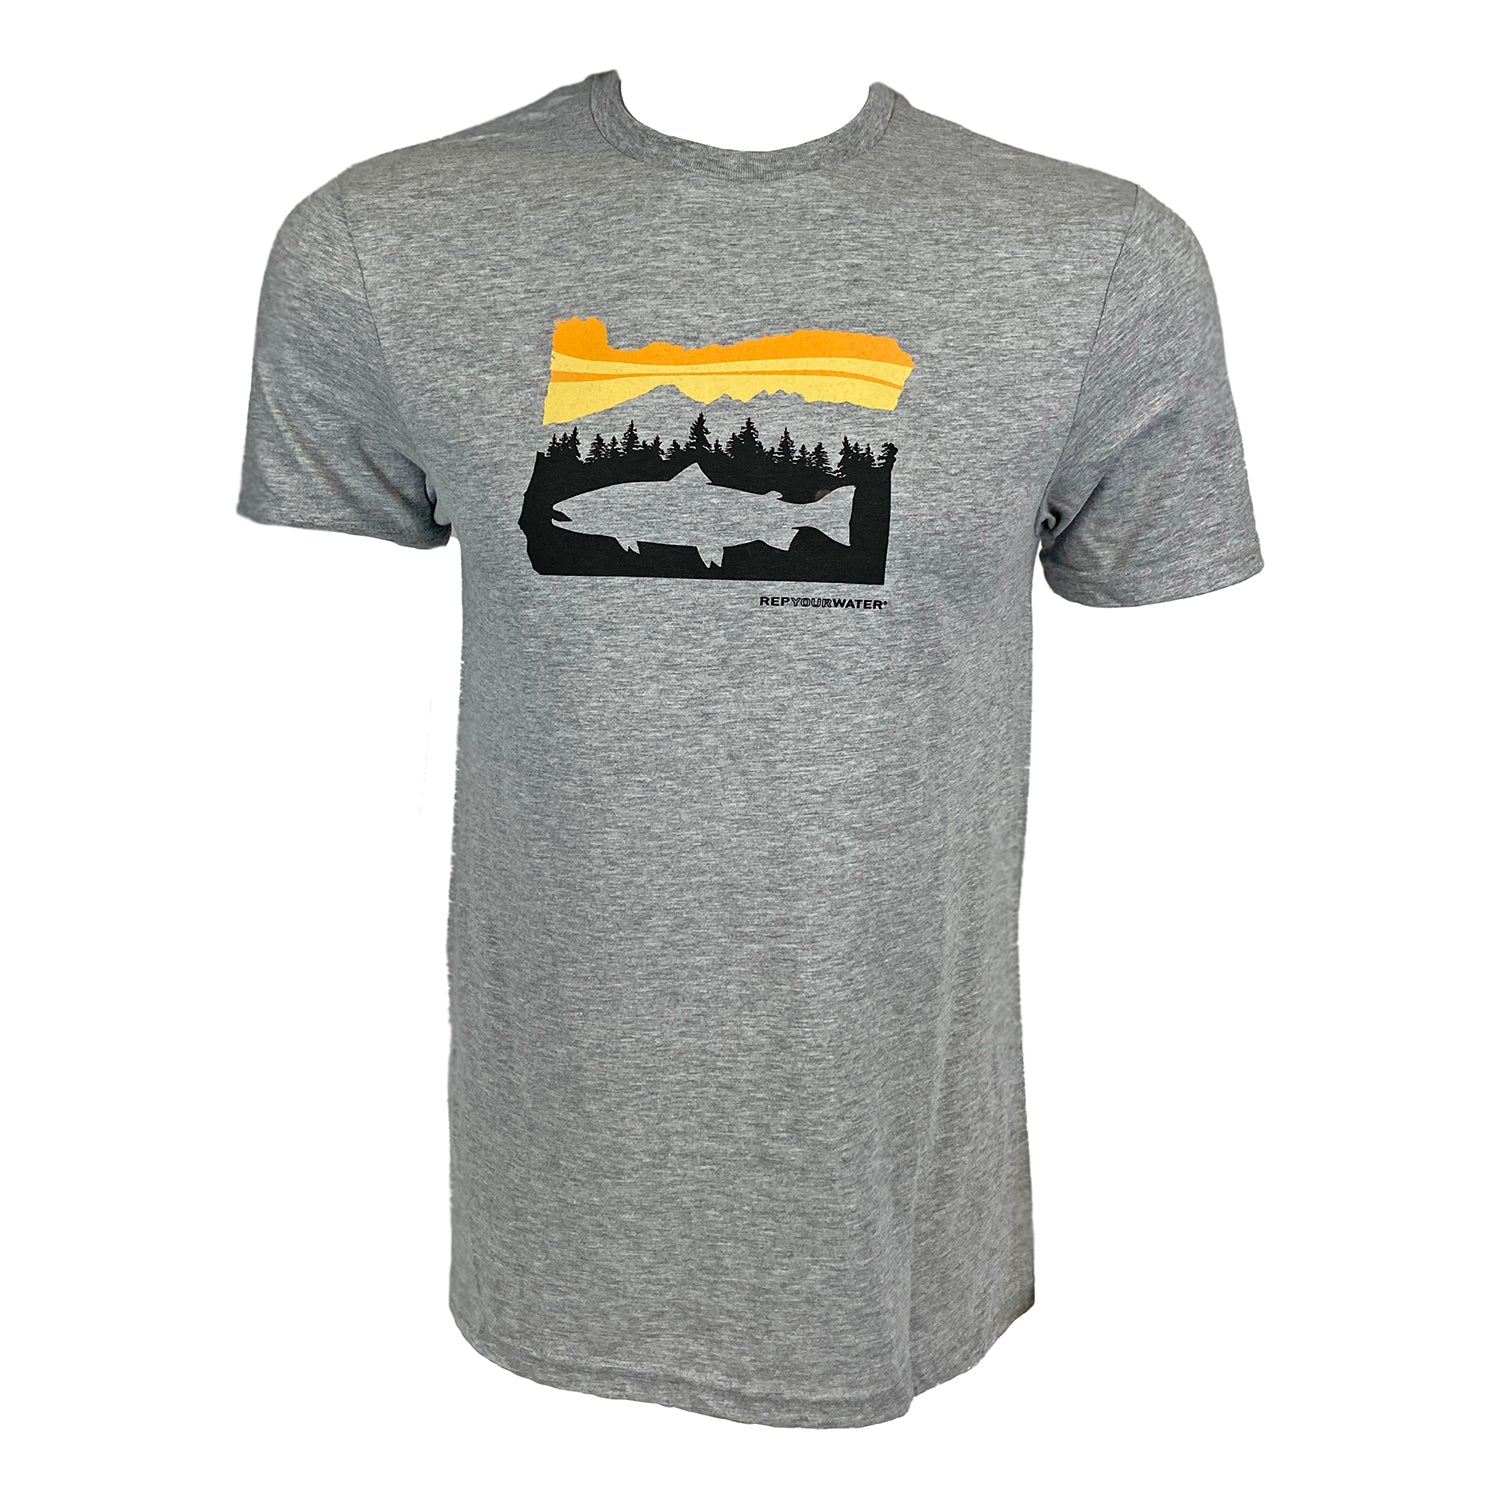 Gray tee shown from the front with Oregon silhouette made from mountain scene with trout silhouette on the chest.